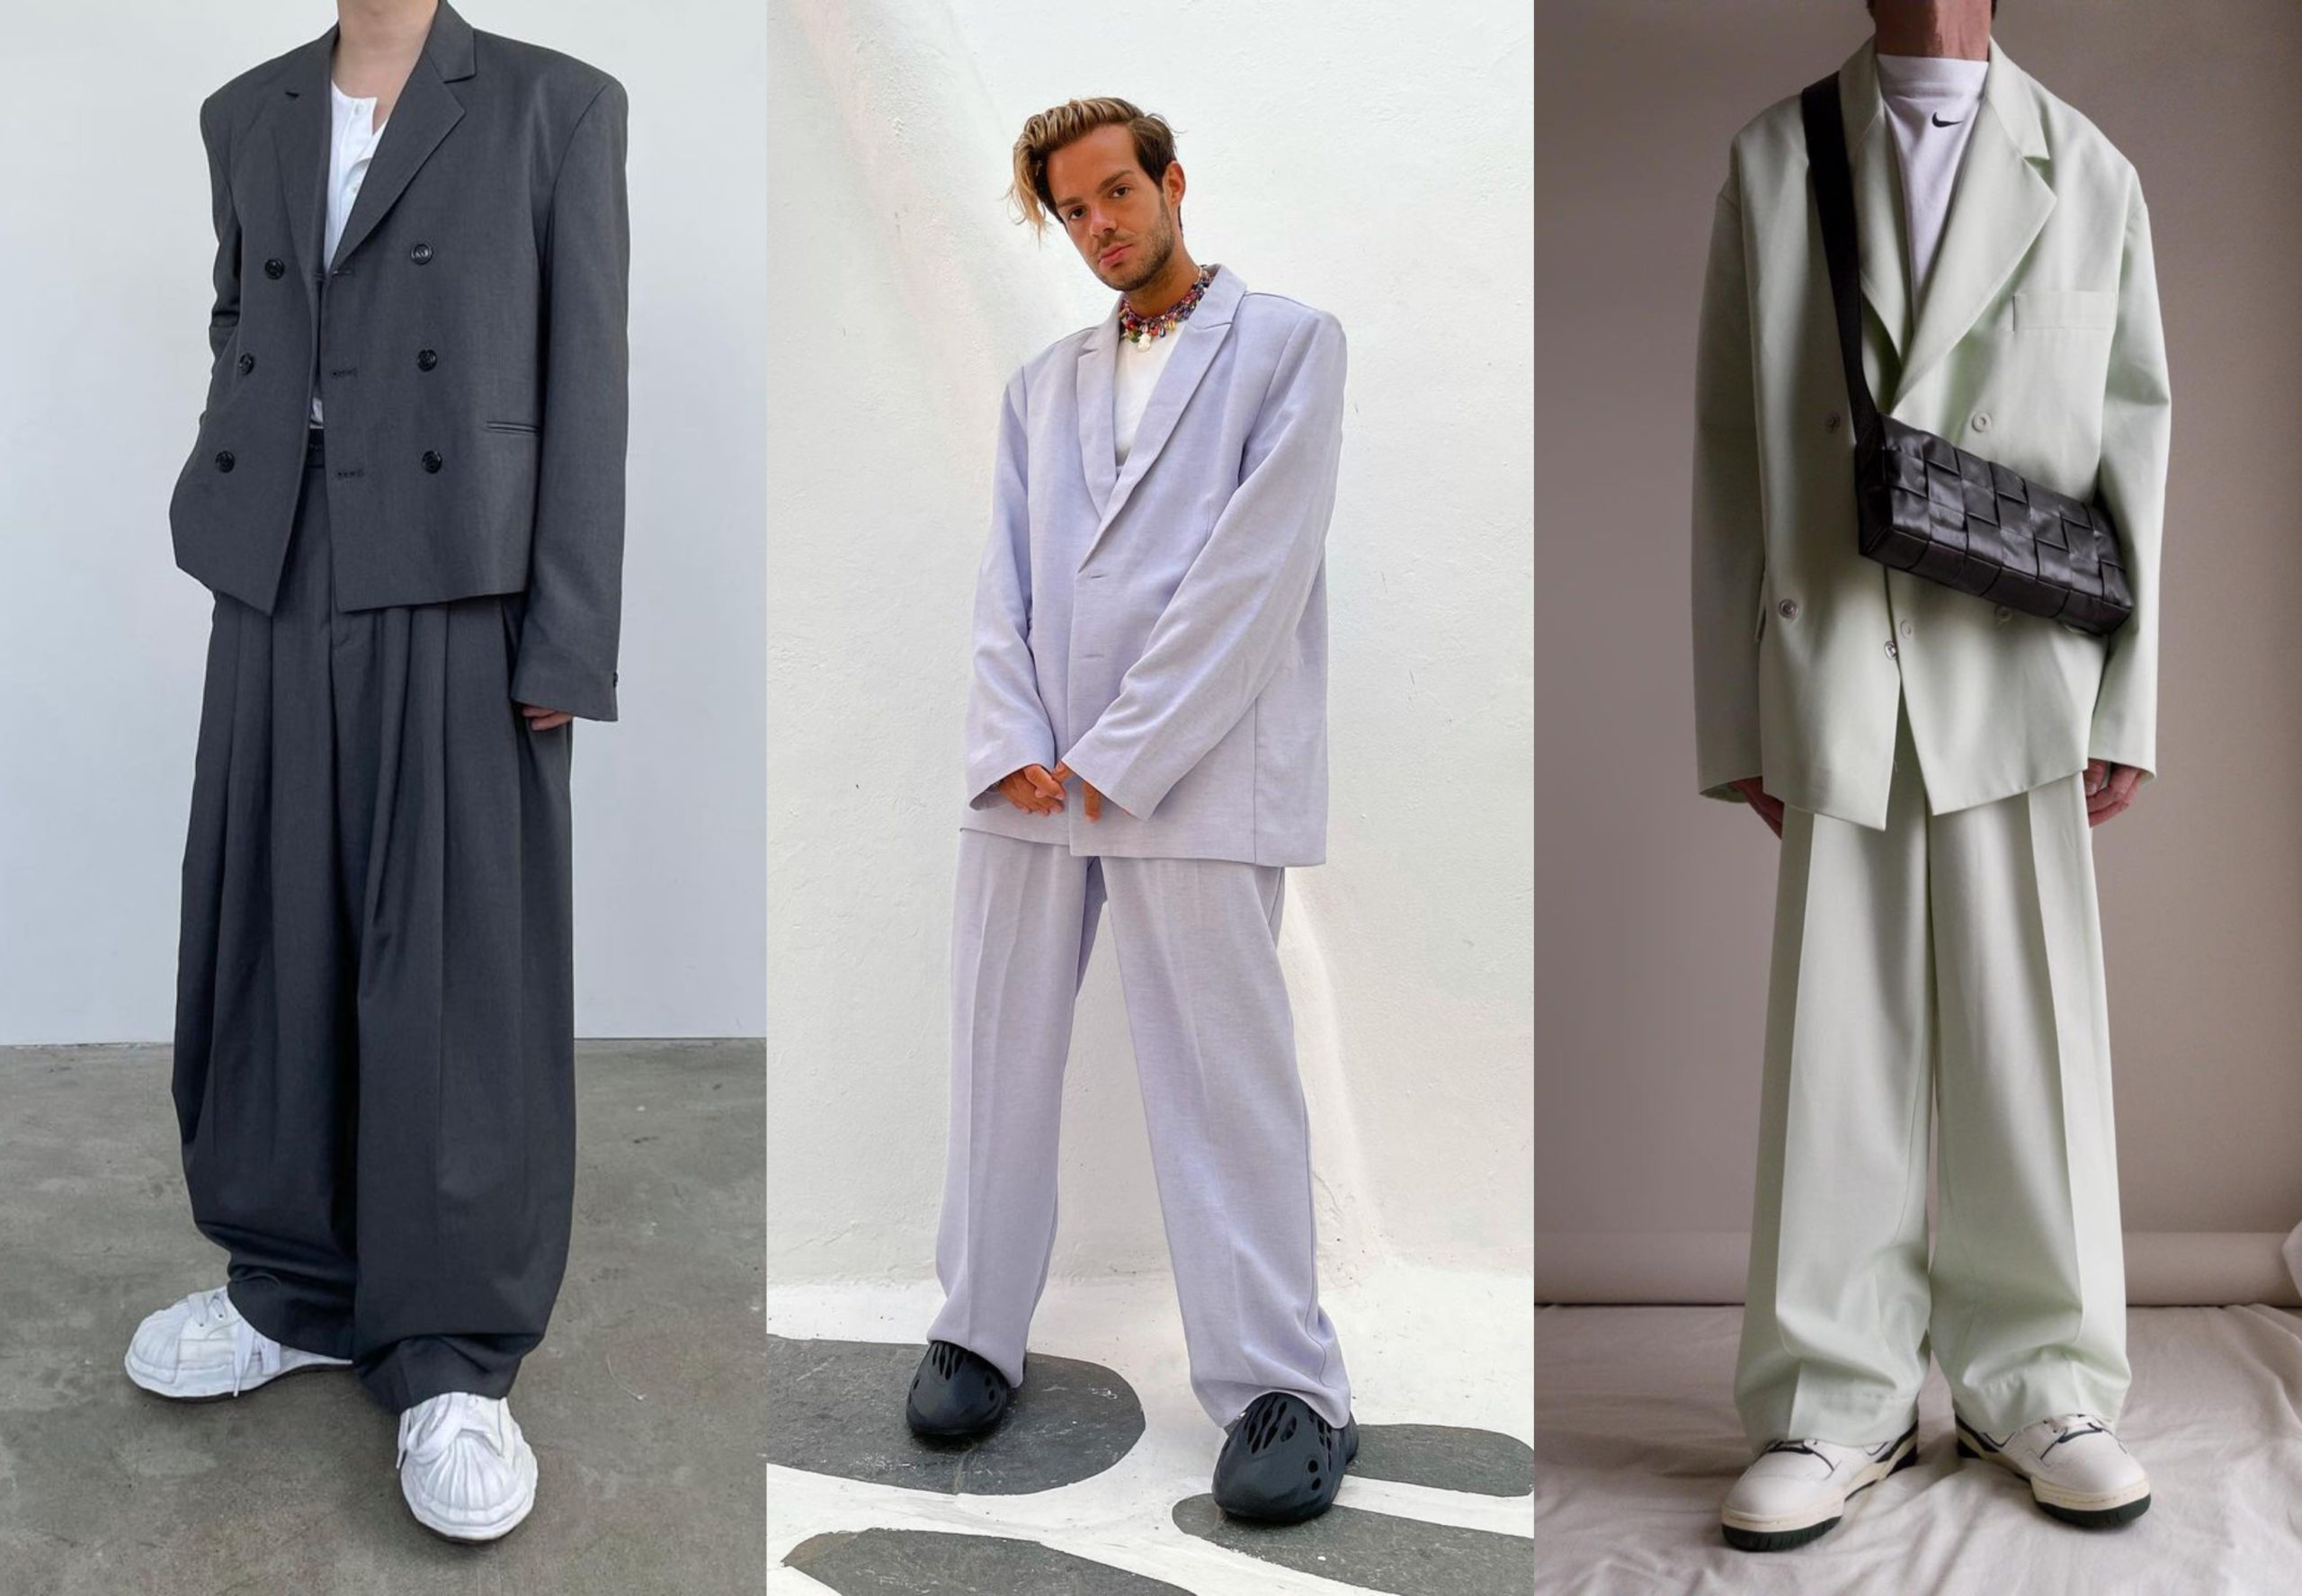 PAUSE Highlights: Styling Oversized Suiting